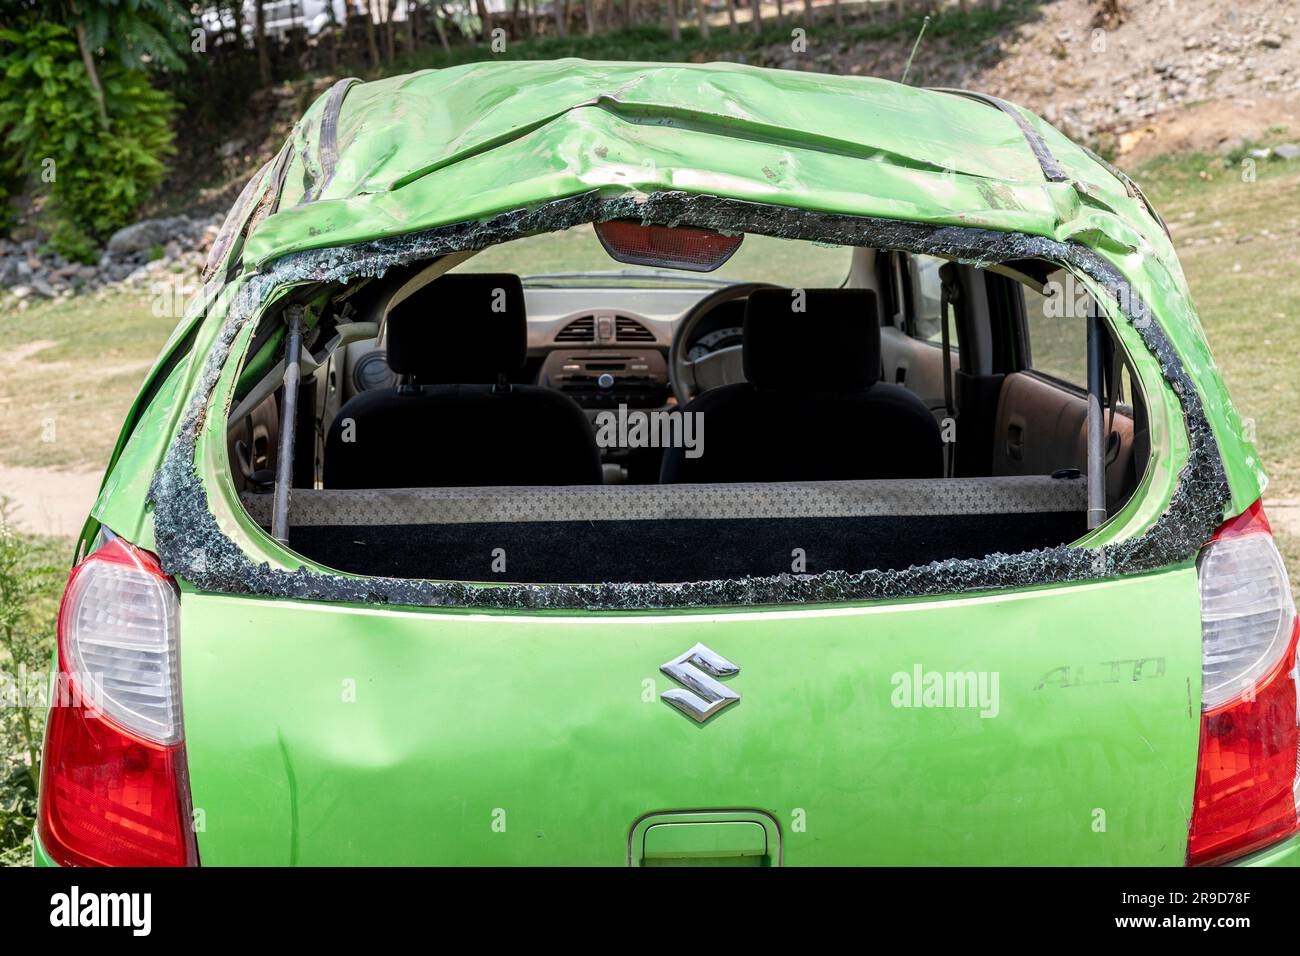 Suzuki alto car destroyed totally in road accident: Swat,Pakistan - June 10, 2023. Stock Photo